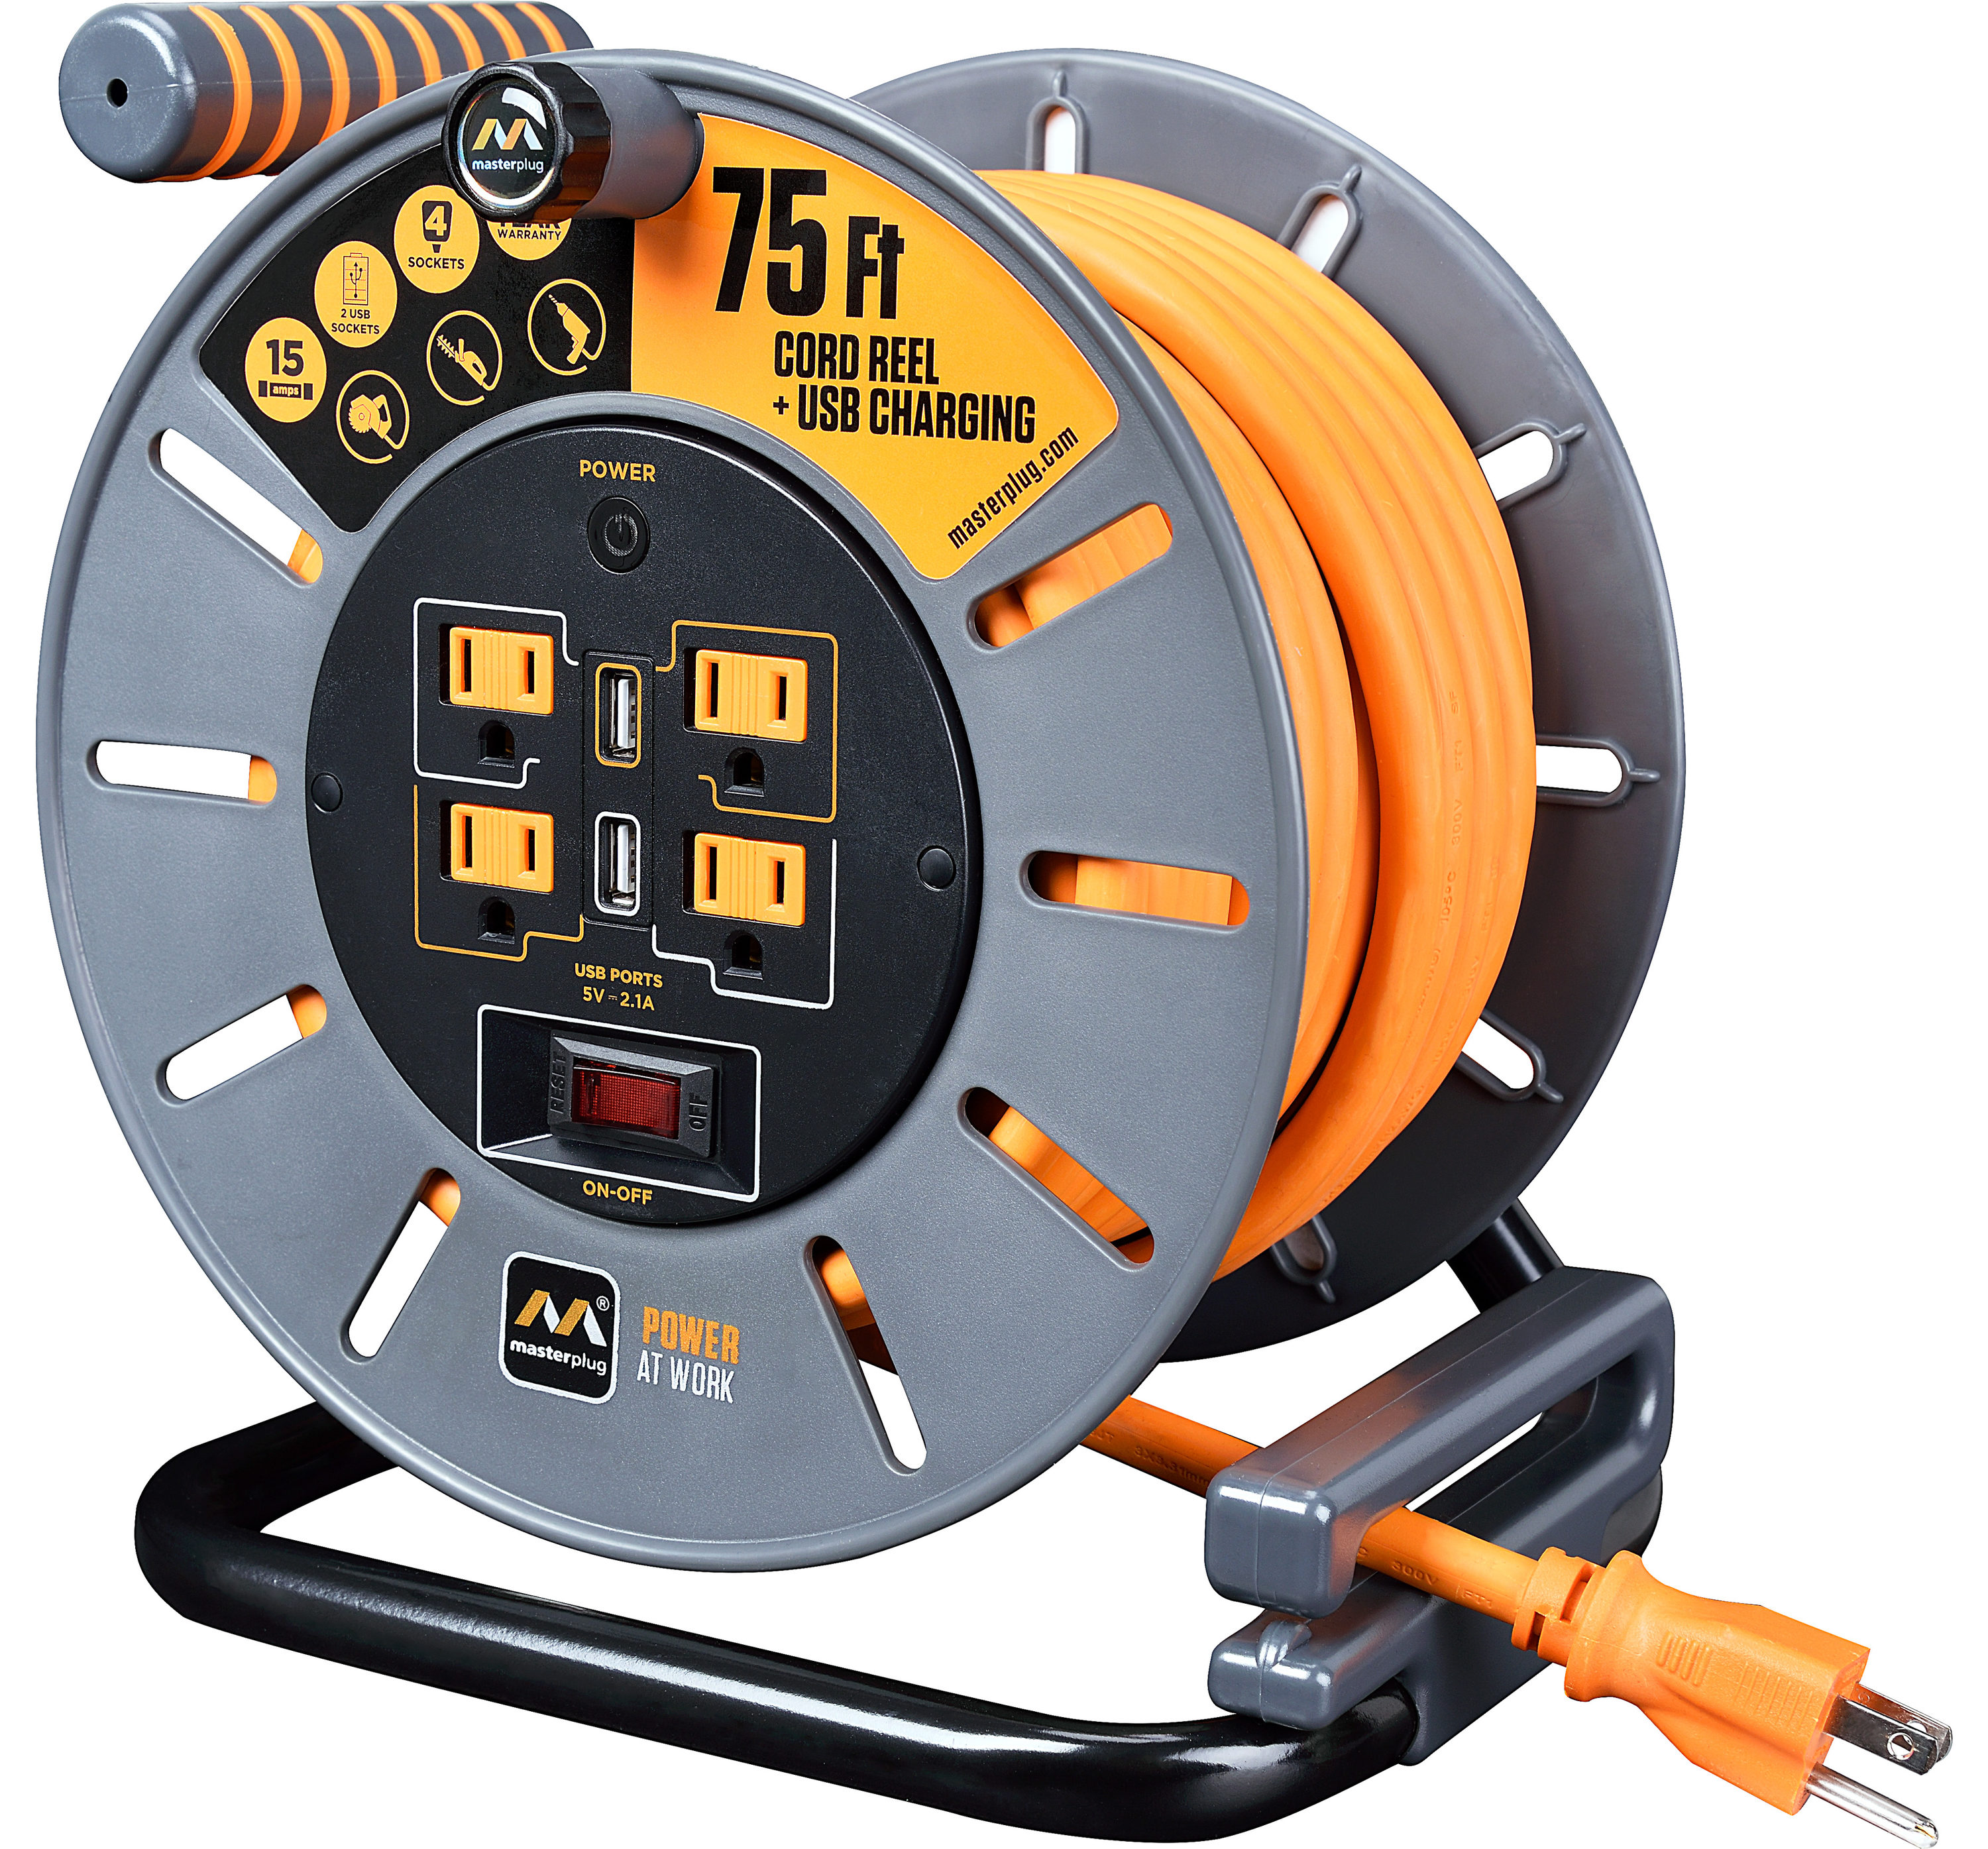 Masterplug 75Ft 4 Sockets 15A 12Awg Large Open Reel with Usb Charging ...